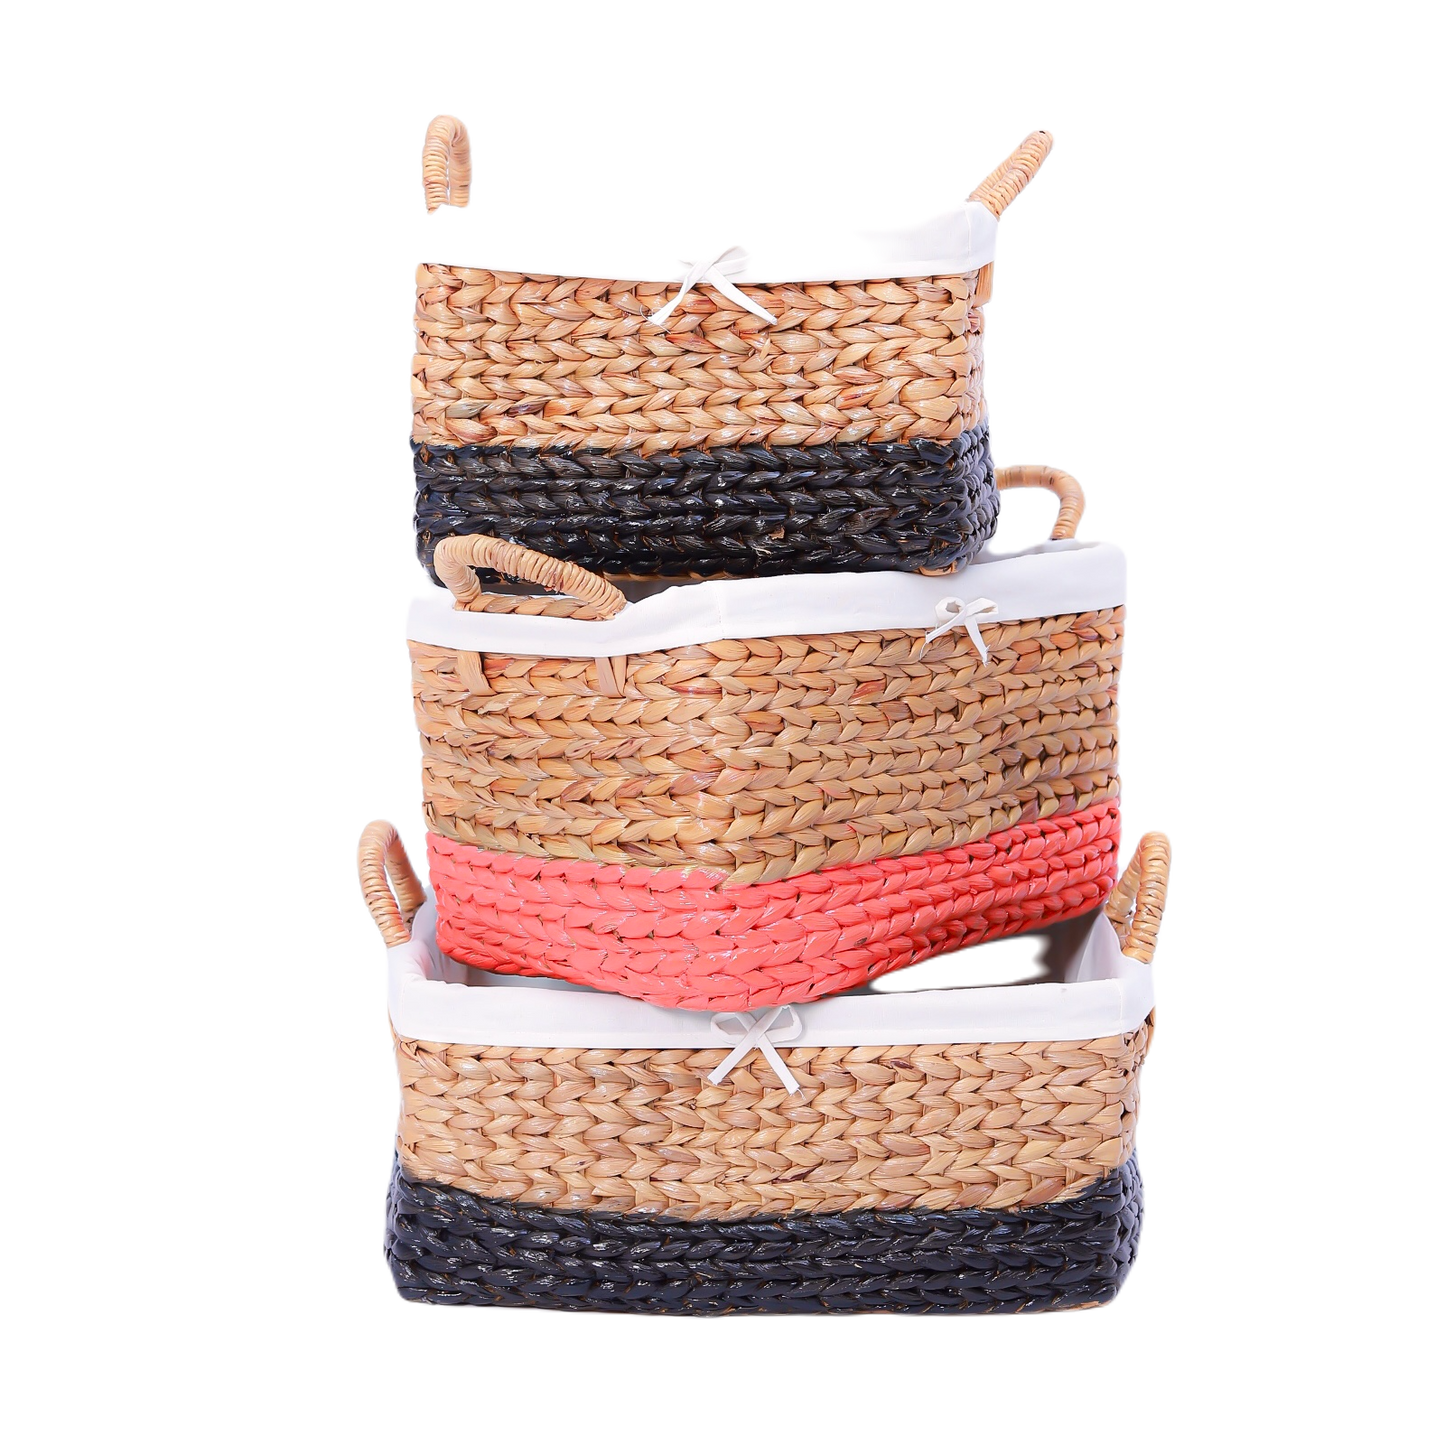 Baskets for clothes, blankets